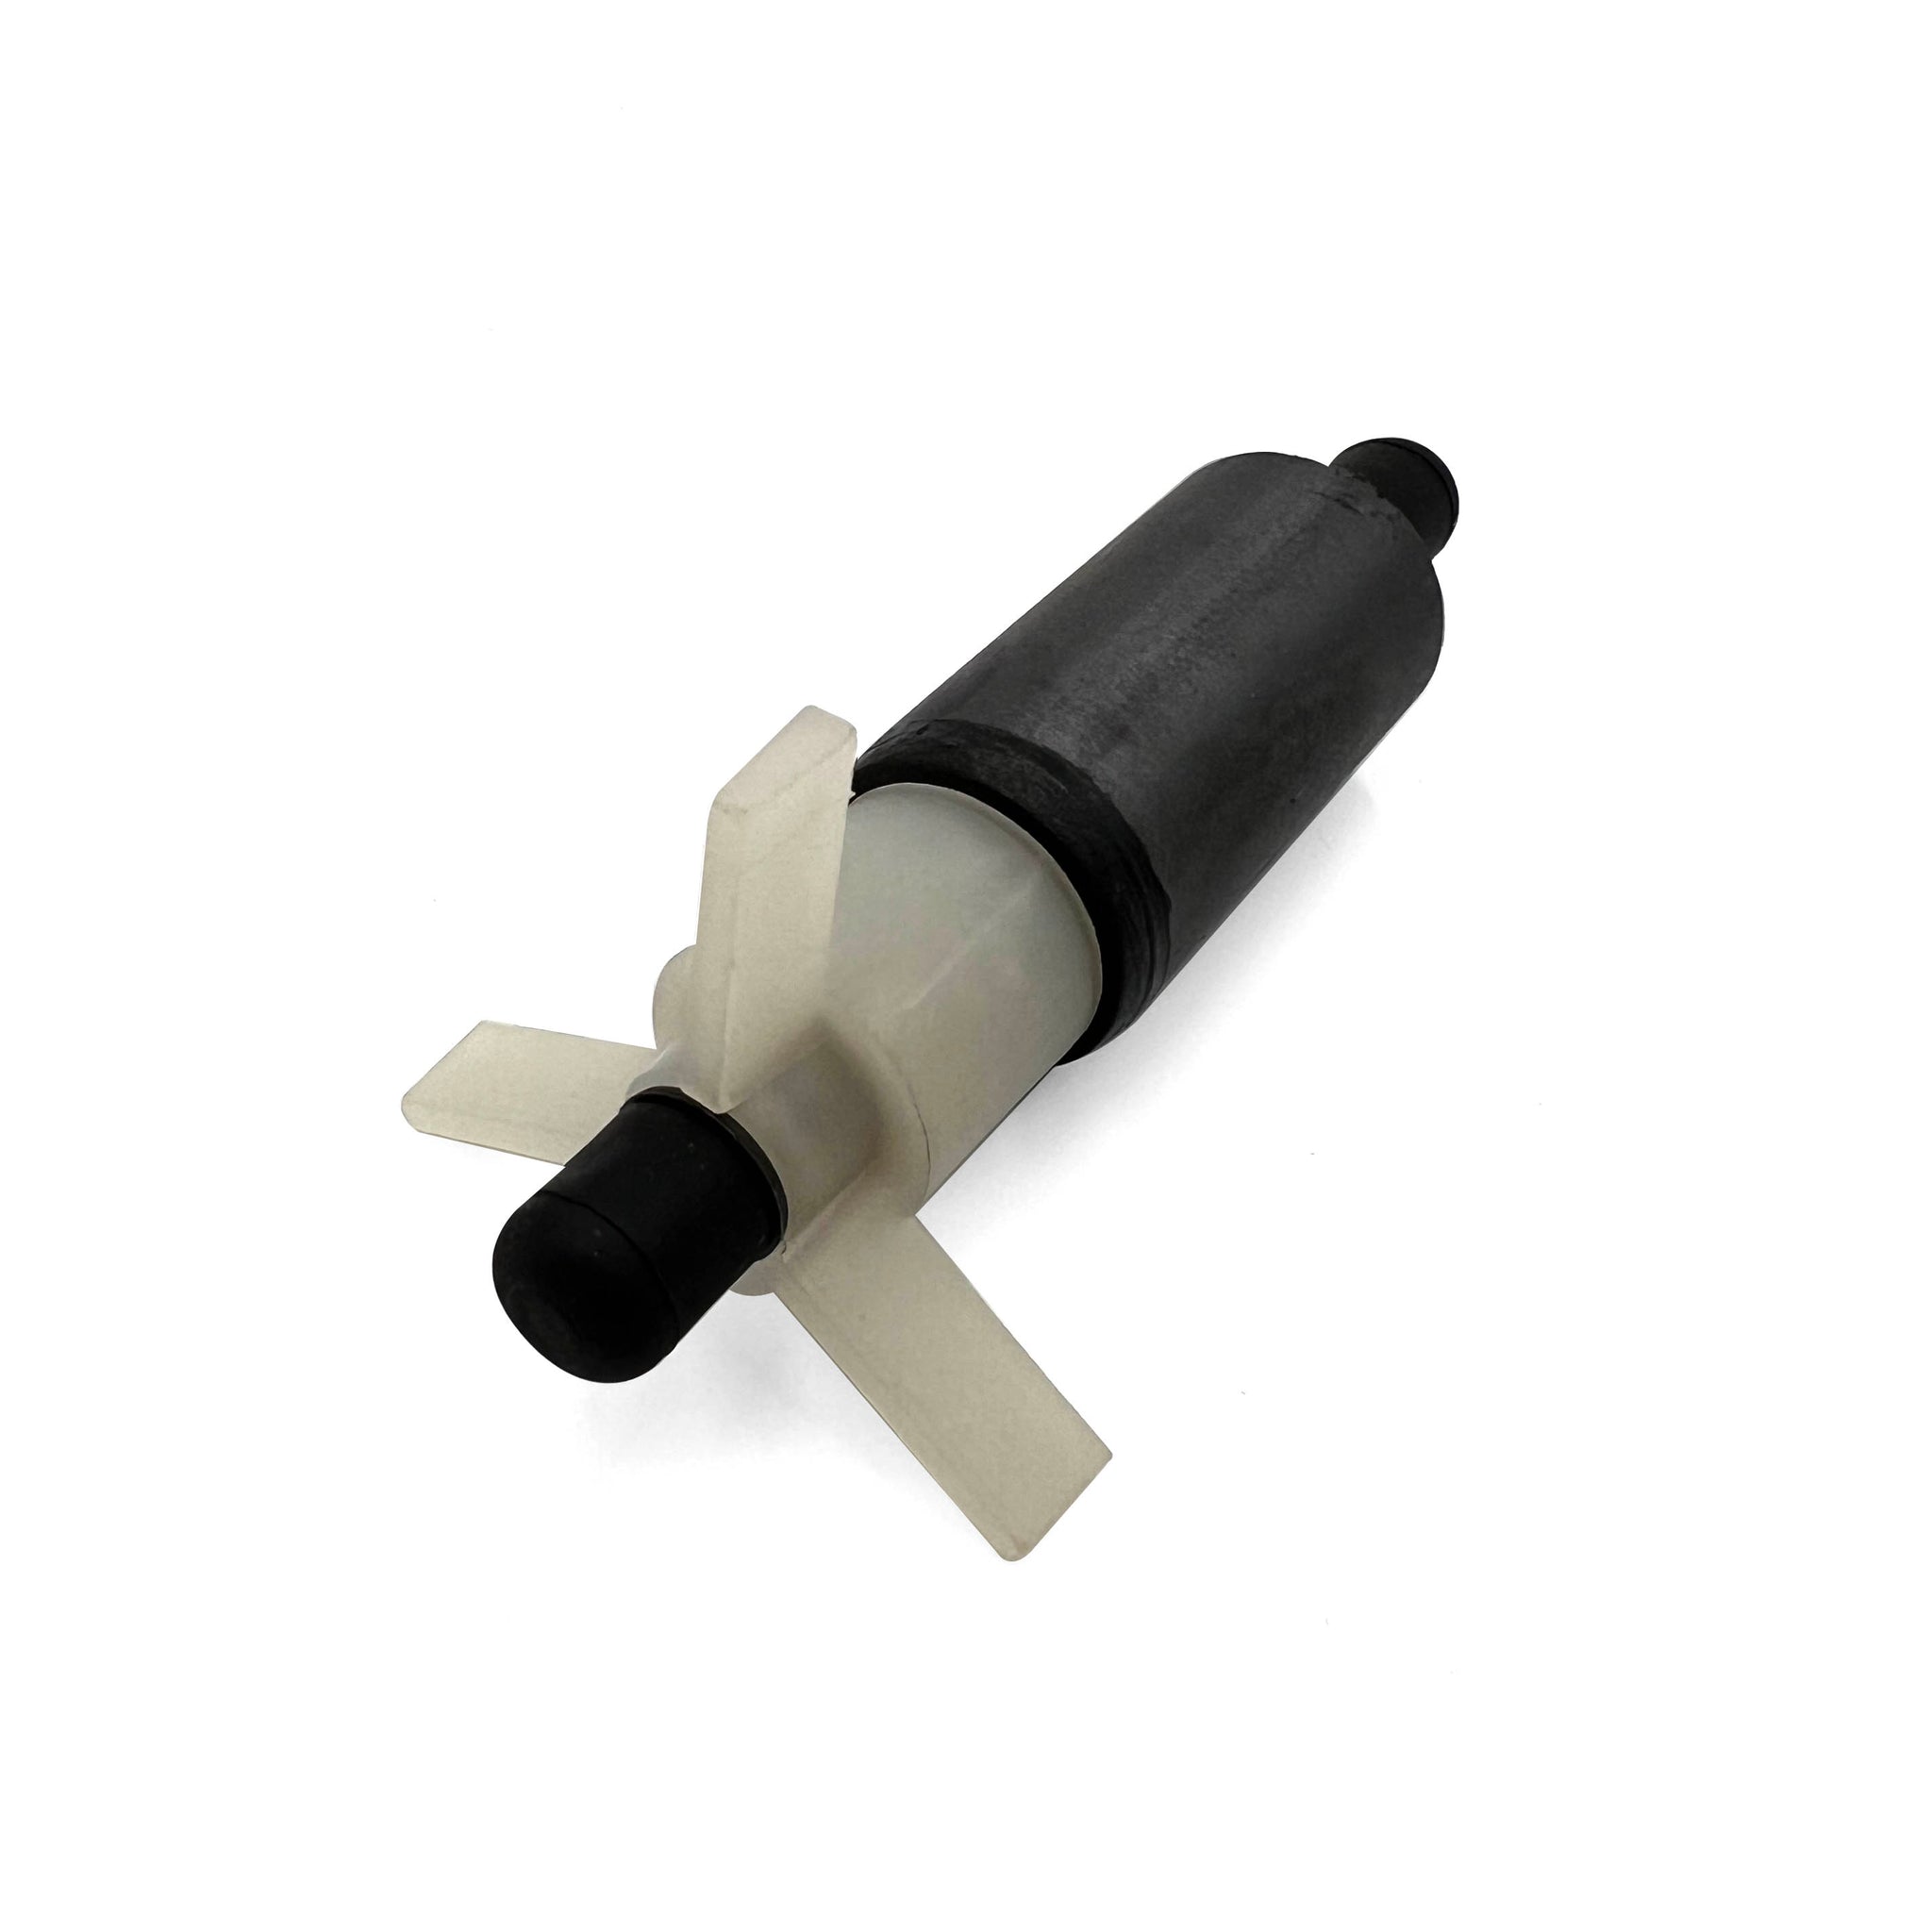 REPLACEMENT IMPELLER ASSEMBLY FOR COVER-CARE 500 PUMP